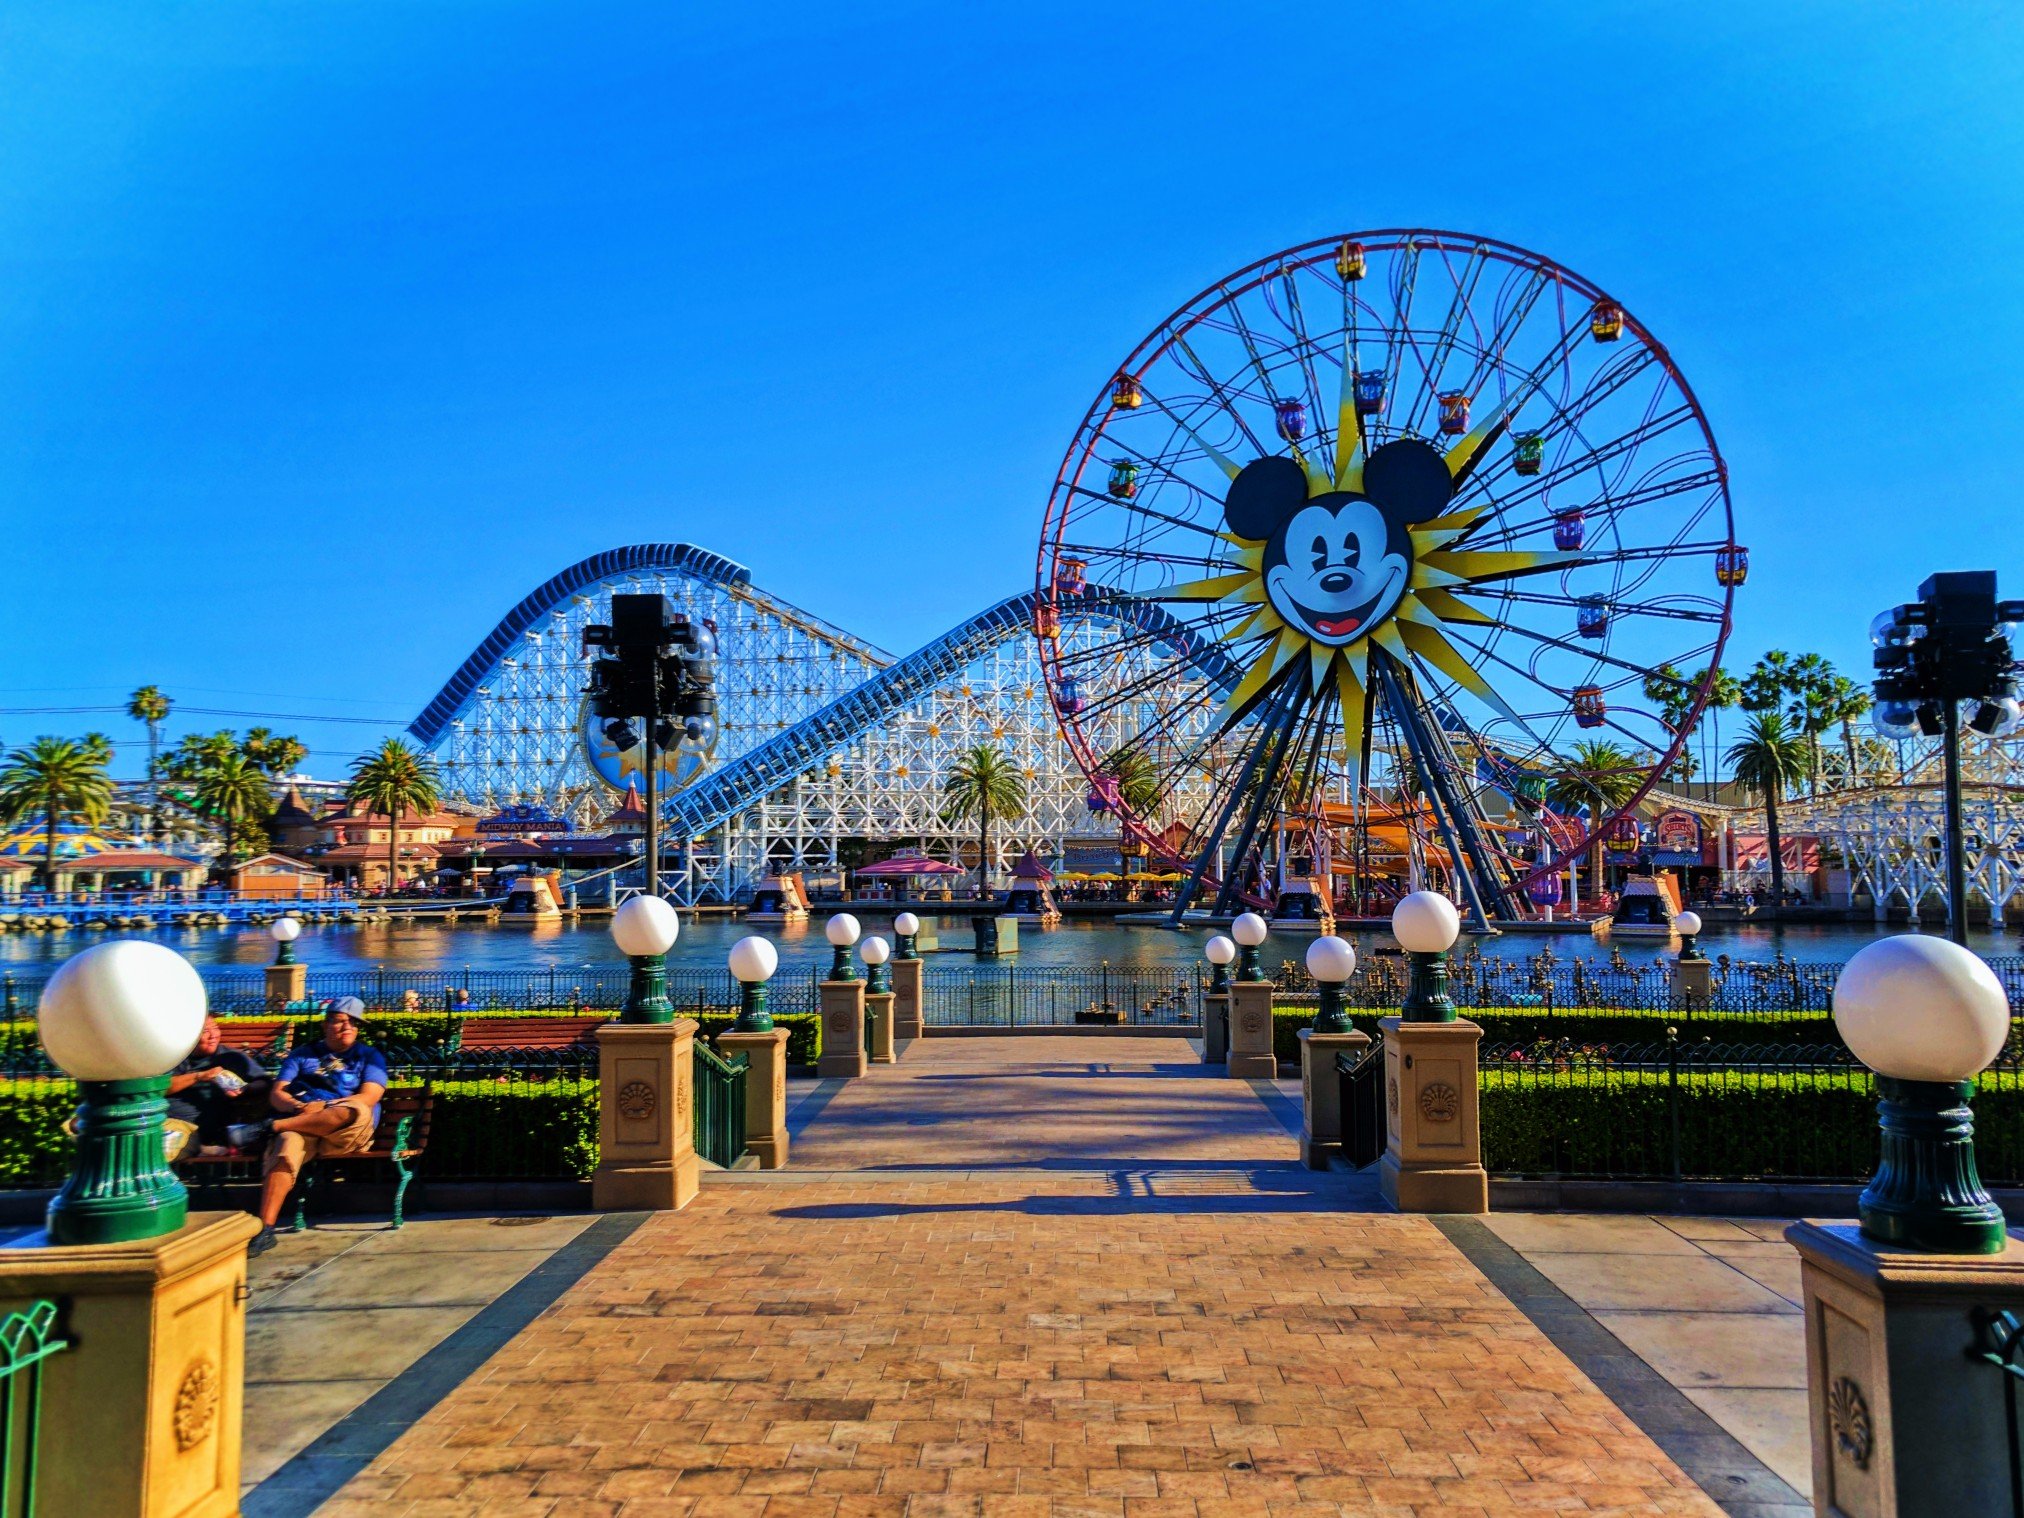 Disney's California Adventure with Kids: family guide for perfect planning